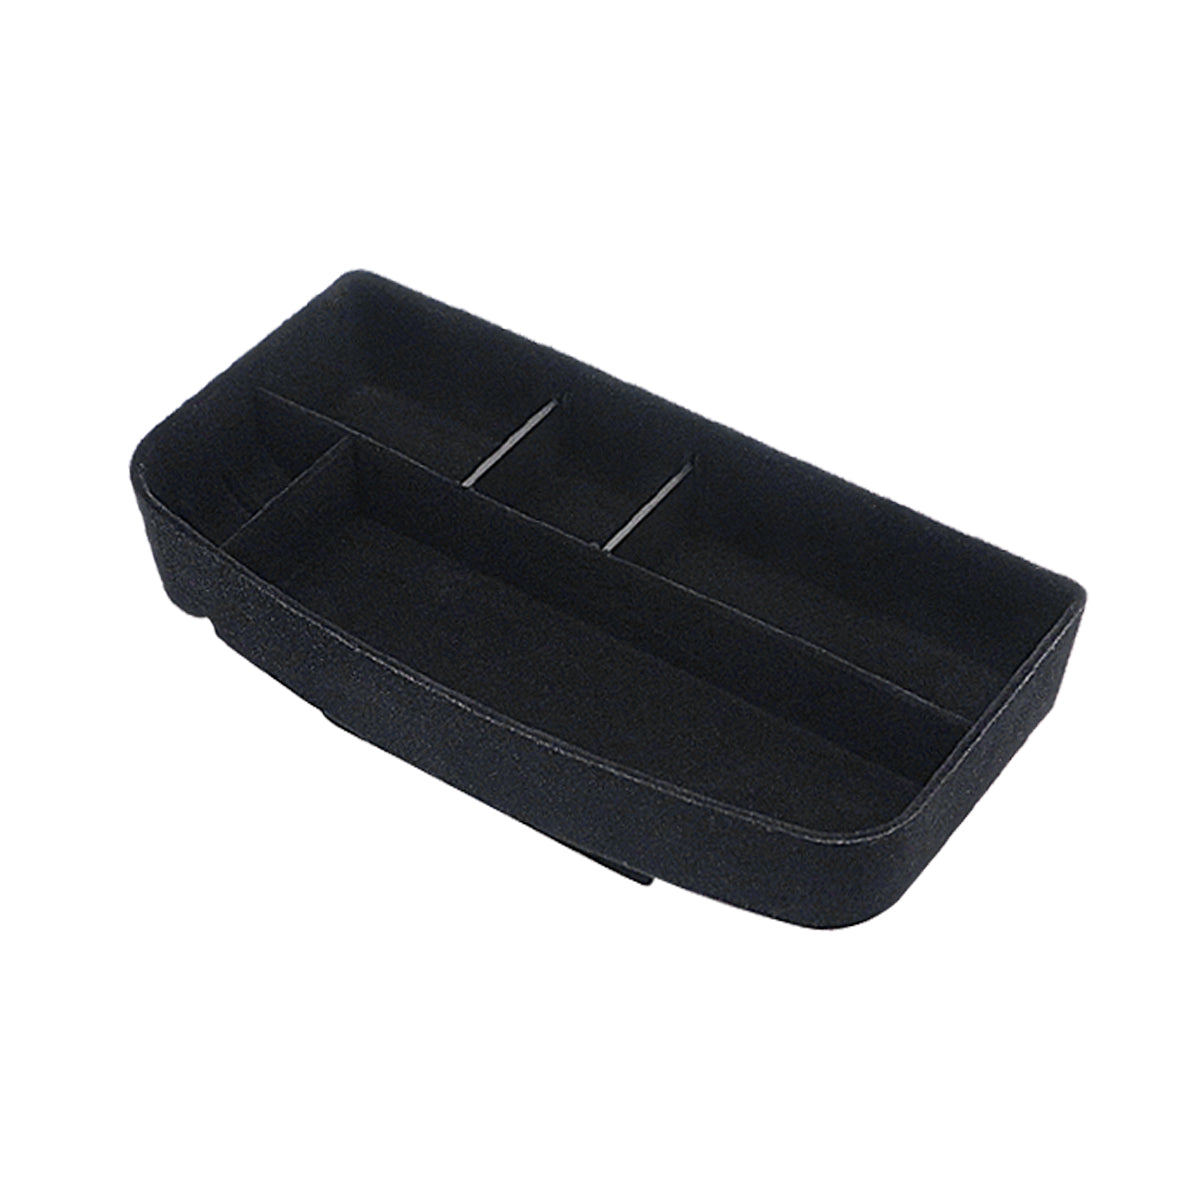 VW ID.4 sunglasses tray. Fits on top of the central console in card holder  STL-file